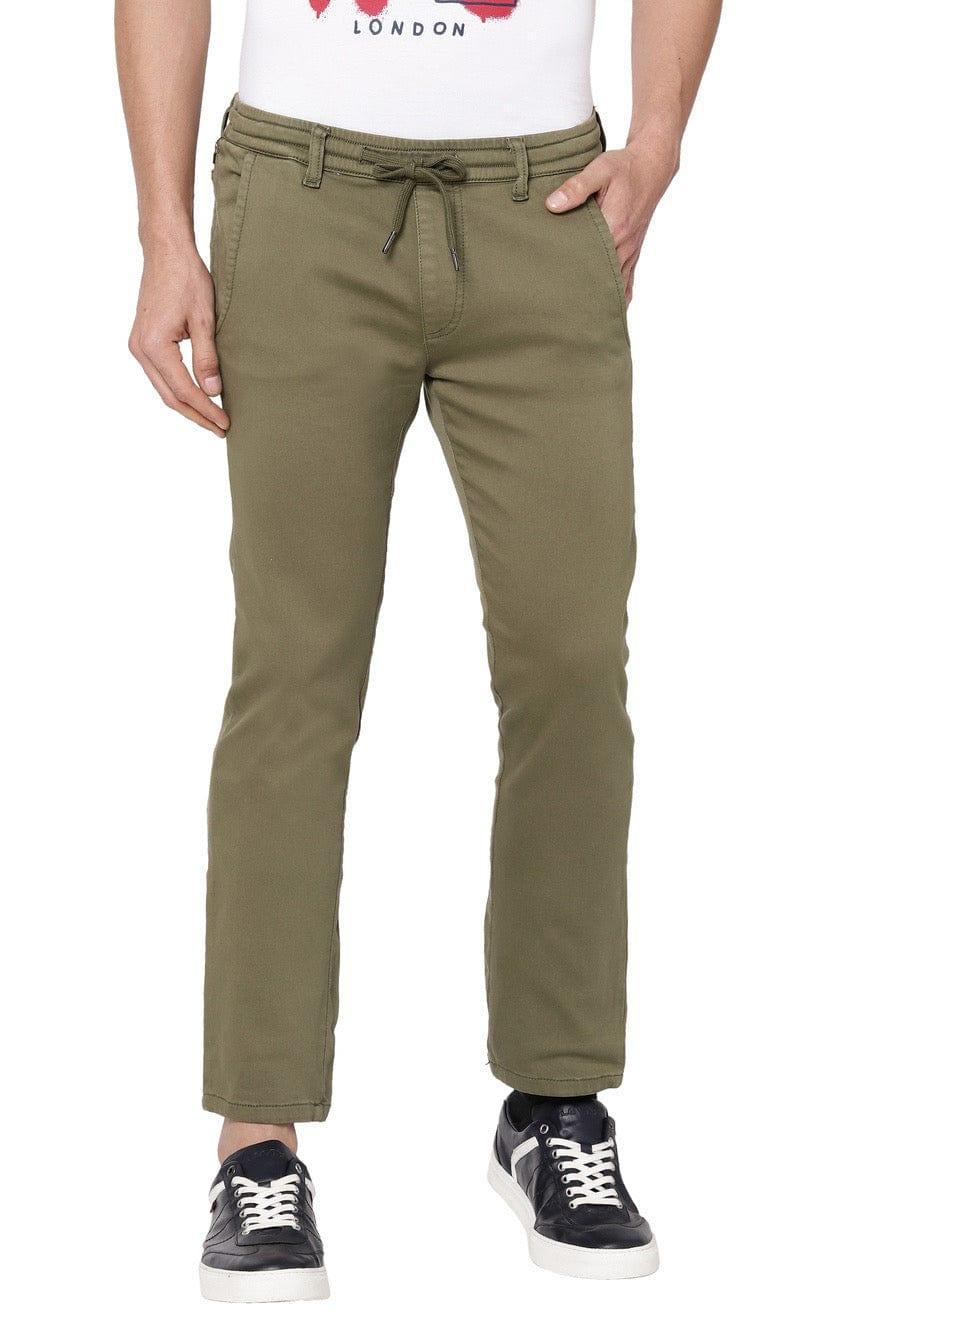 Shop Pepe Jeans Slim Fit flare pants on Rinascente